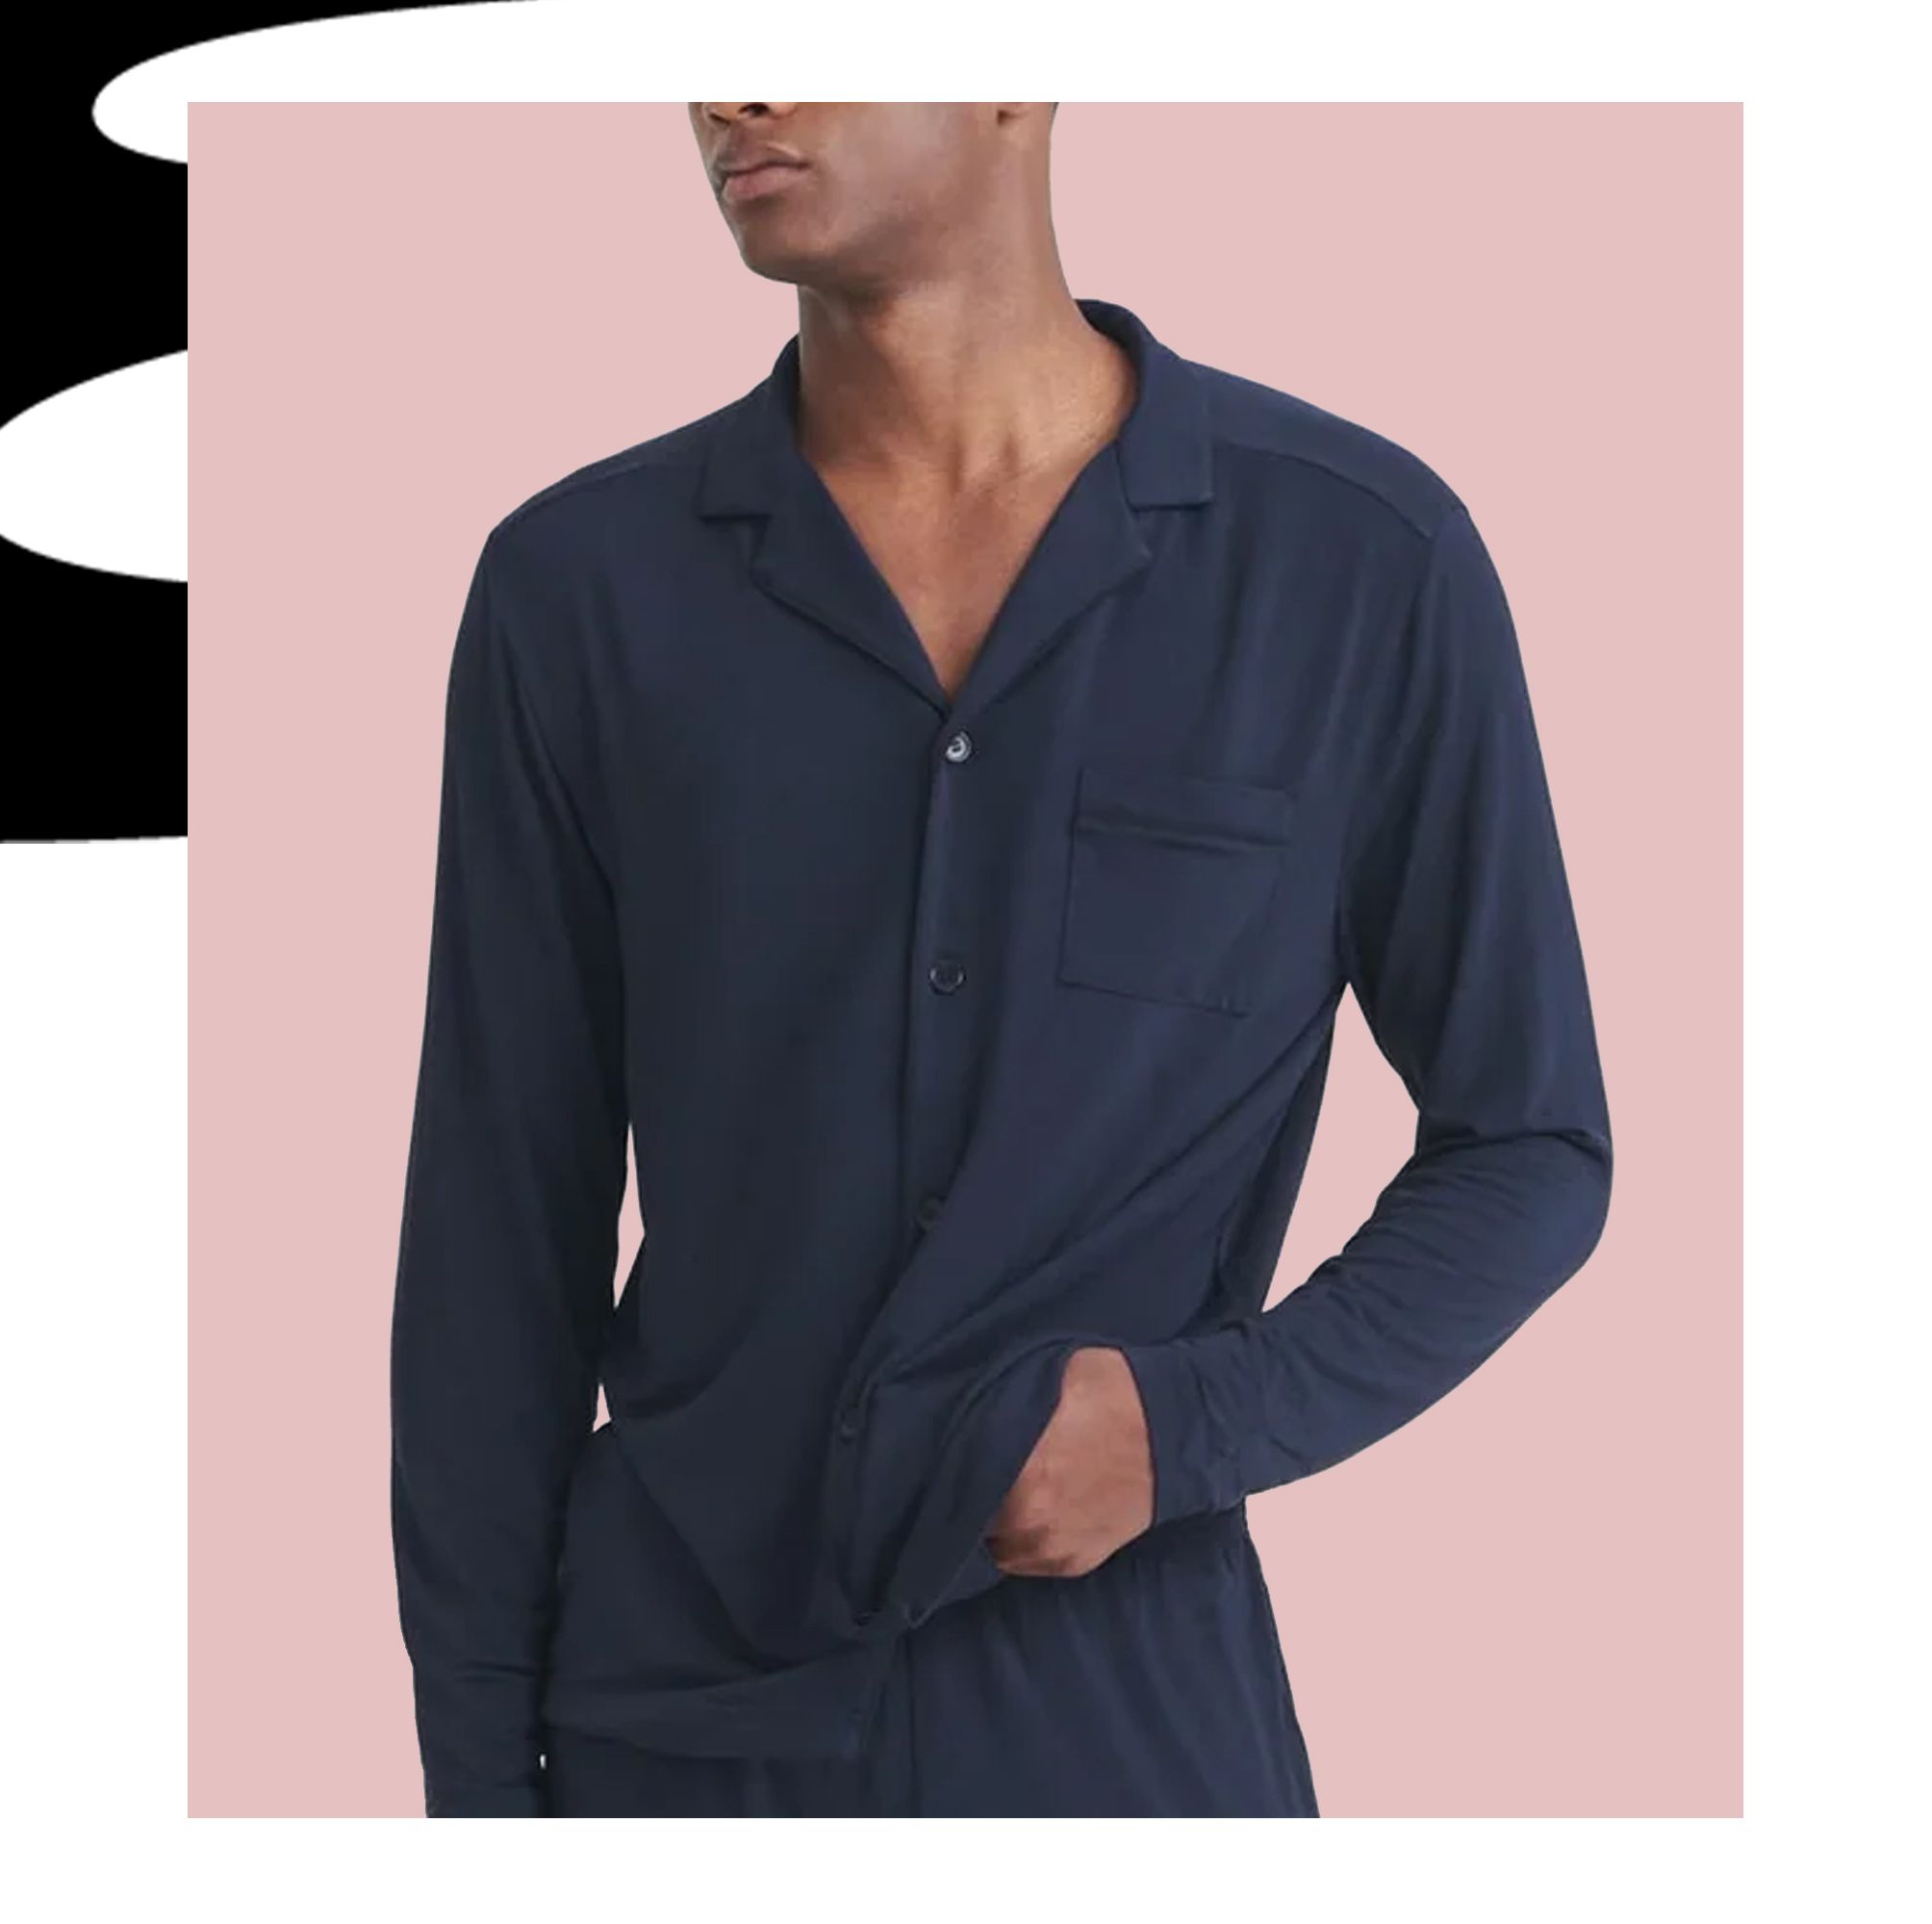 23 Pajamas That Make Going to Bed a Genuinely Stylish Pursuit